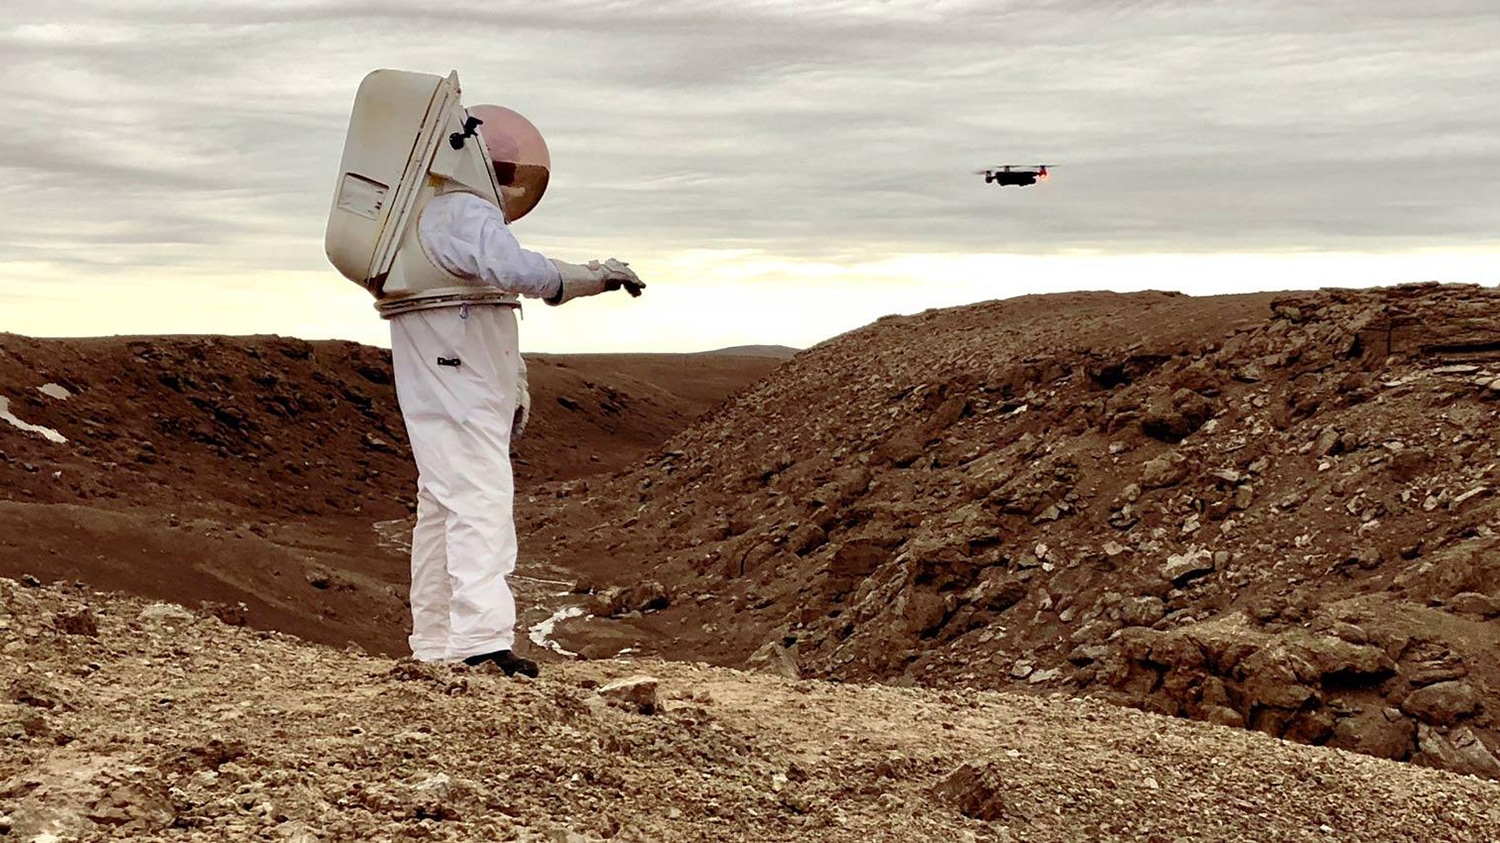 Demonstration at the NASA Haughton-Mars Project field research site on Devon Island, High Arctic, of how an “Astronaut Smart Glove” might allow future astronauts on the Moon, Mars or beyond to single-handedly teleoperate even complex robotic assets such as drones.